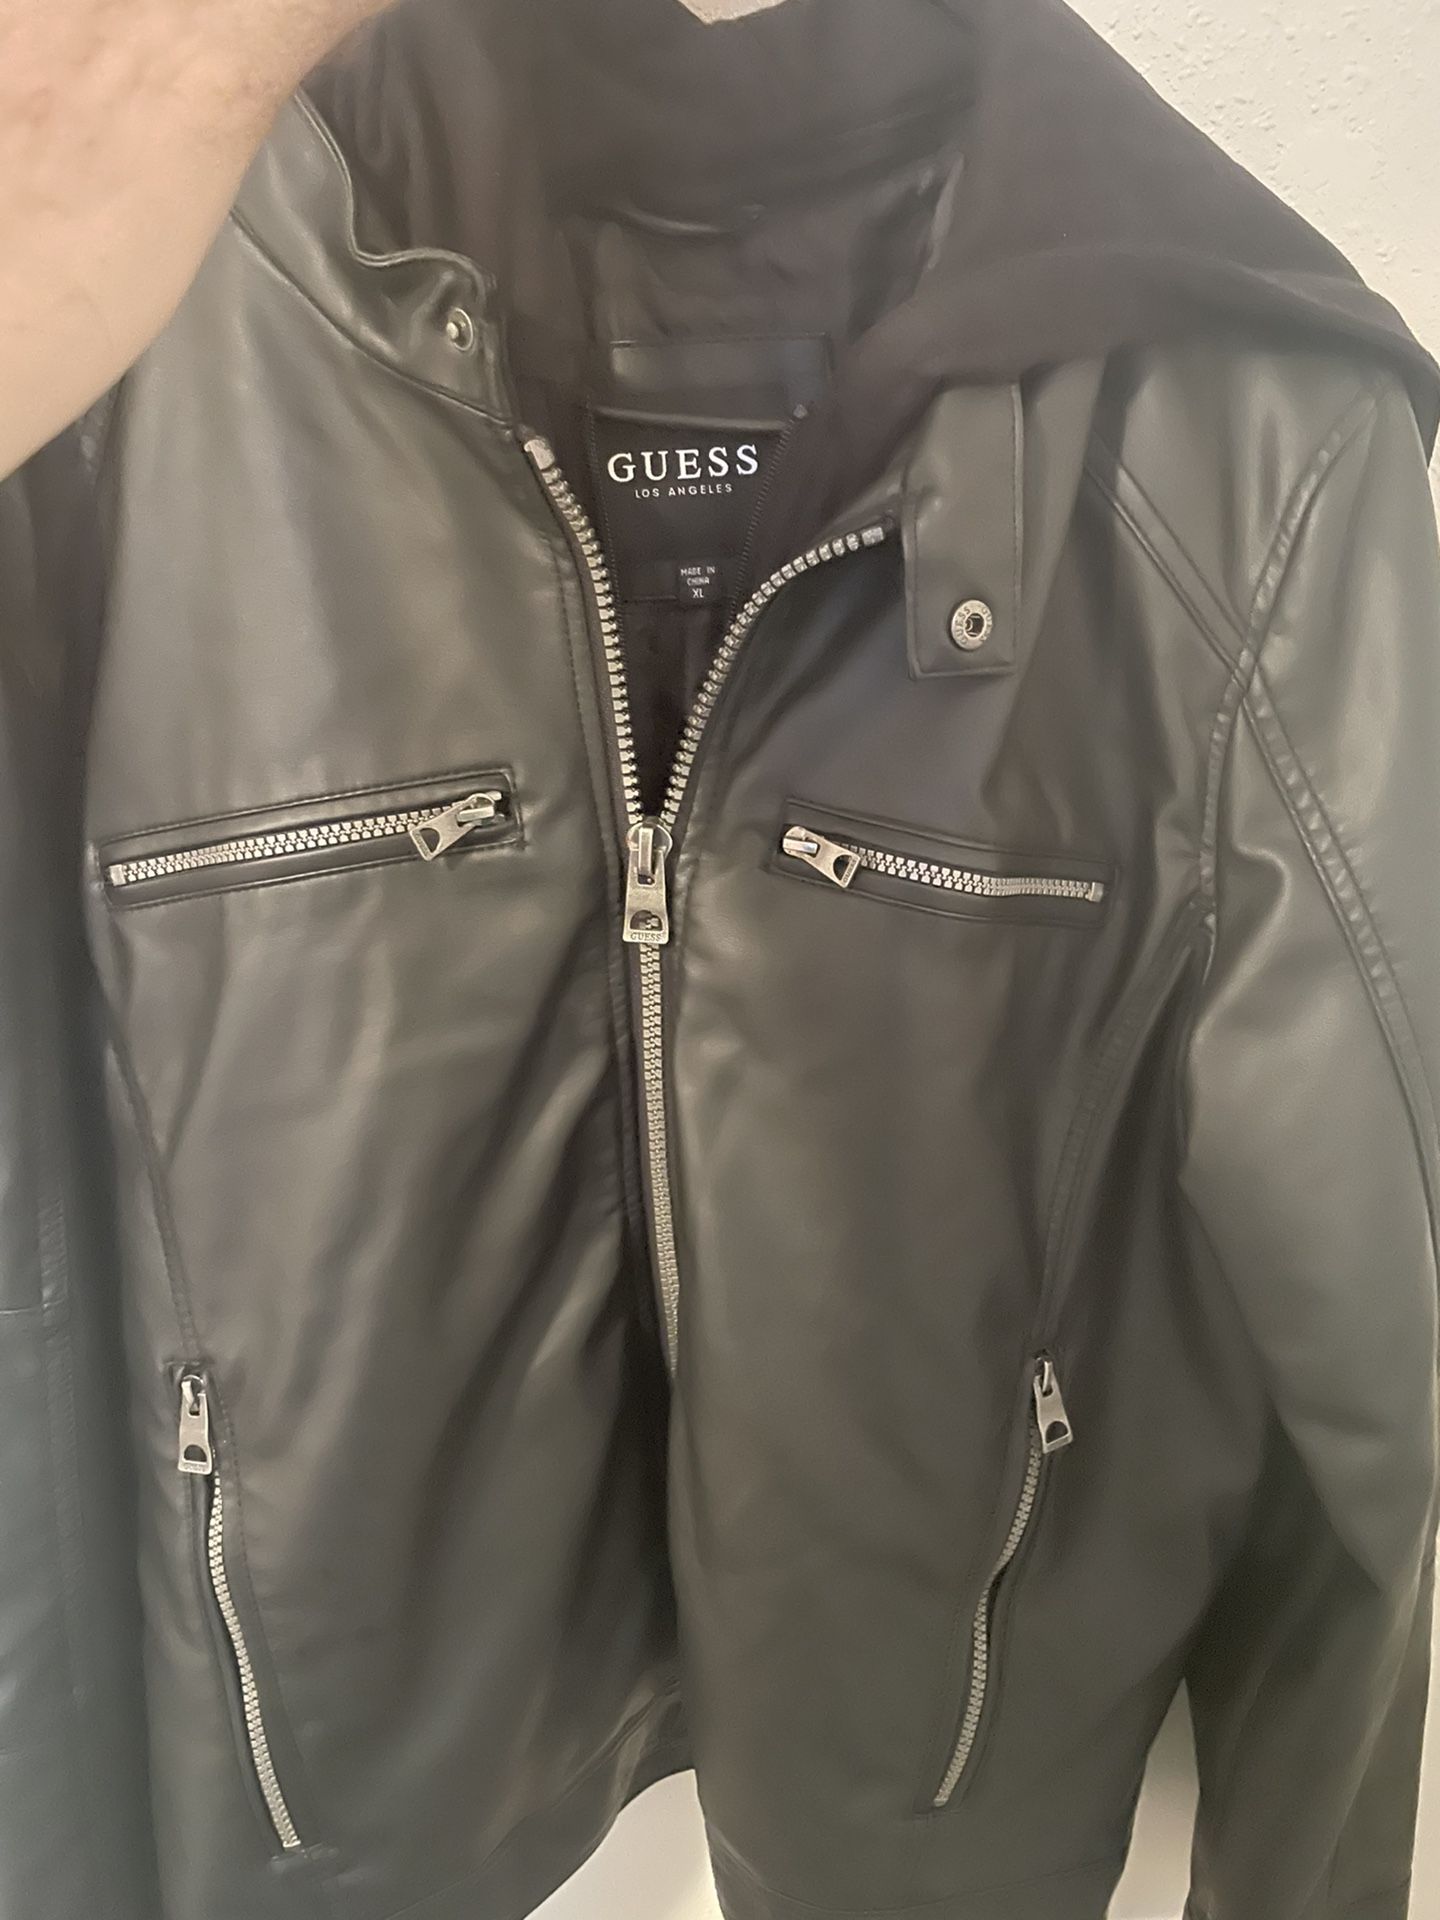 Guess Mens Jacket Brand New